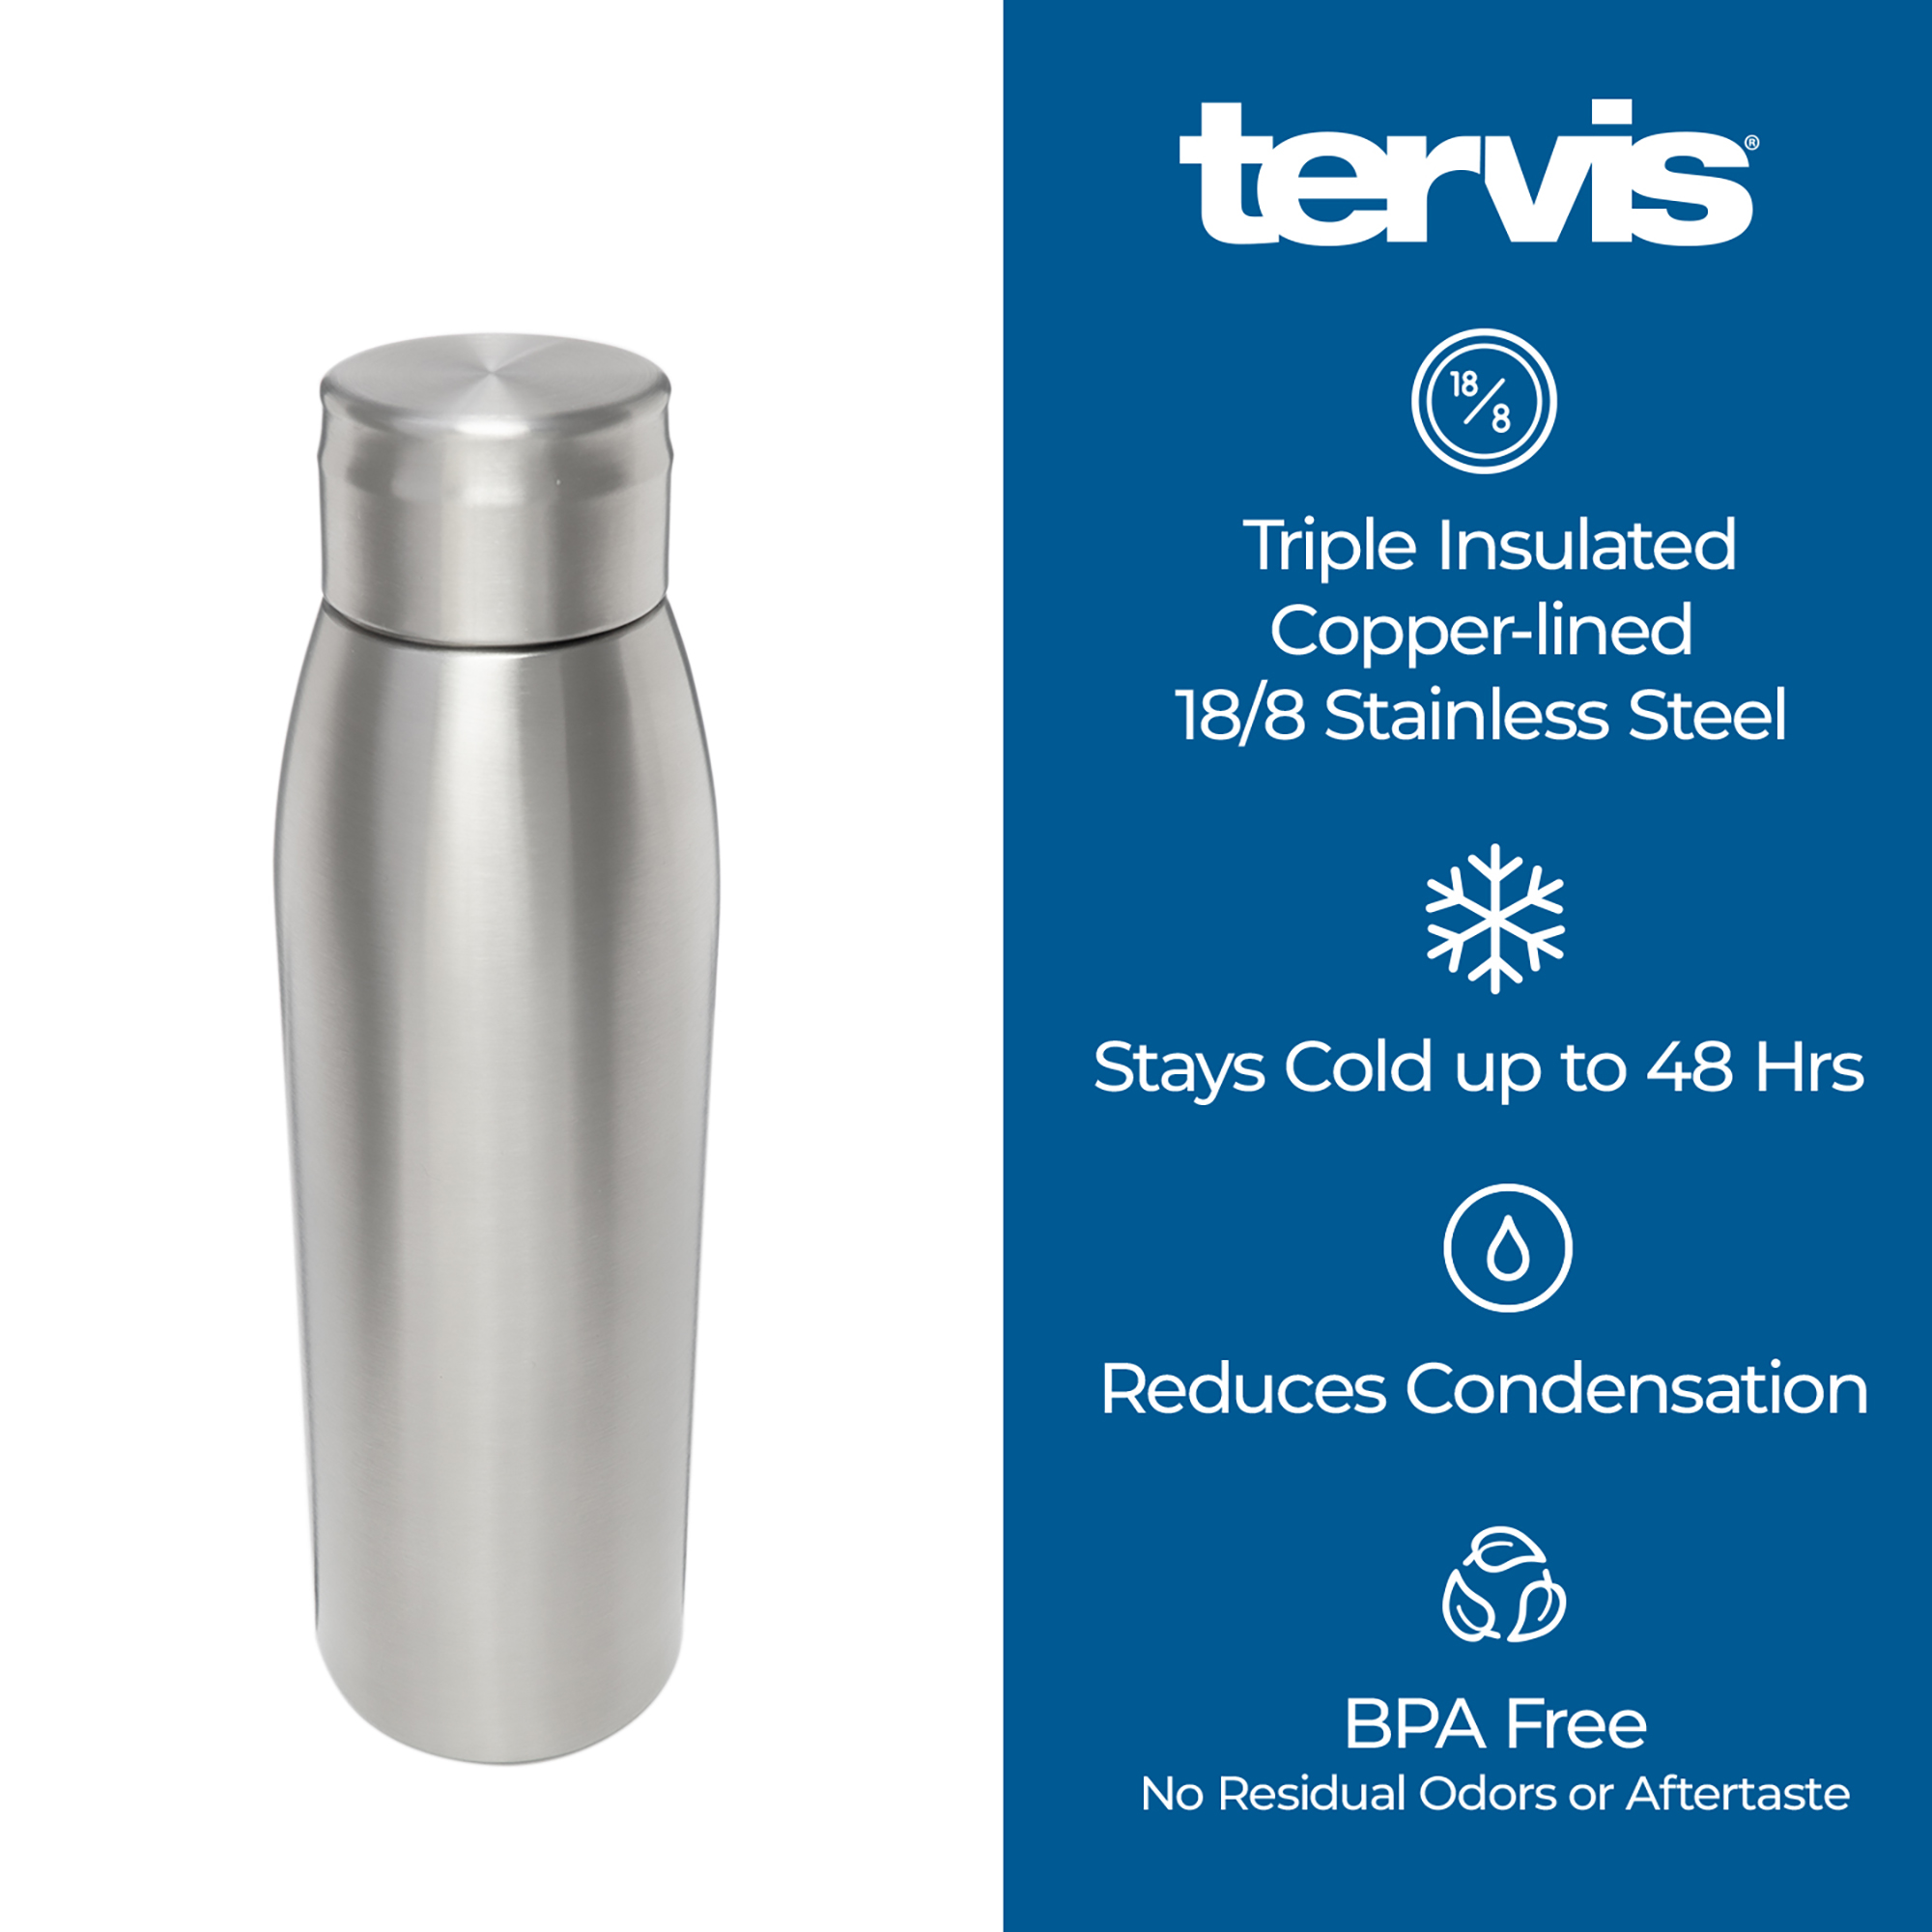 Tervis Powder Coated Stainless Steel Triple Walled Insulated Tumbler, 25oz Slim Carafe, Mangrove Green